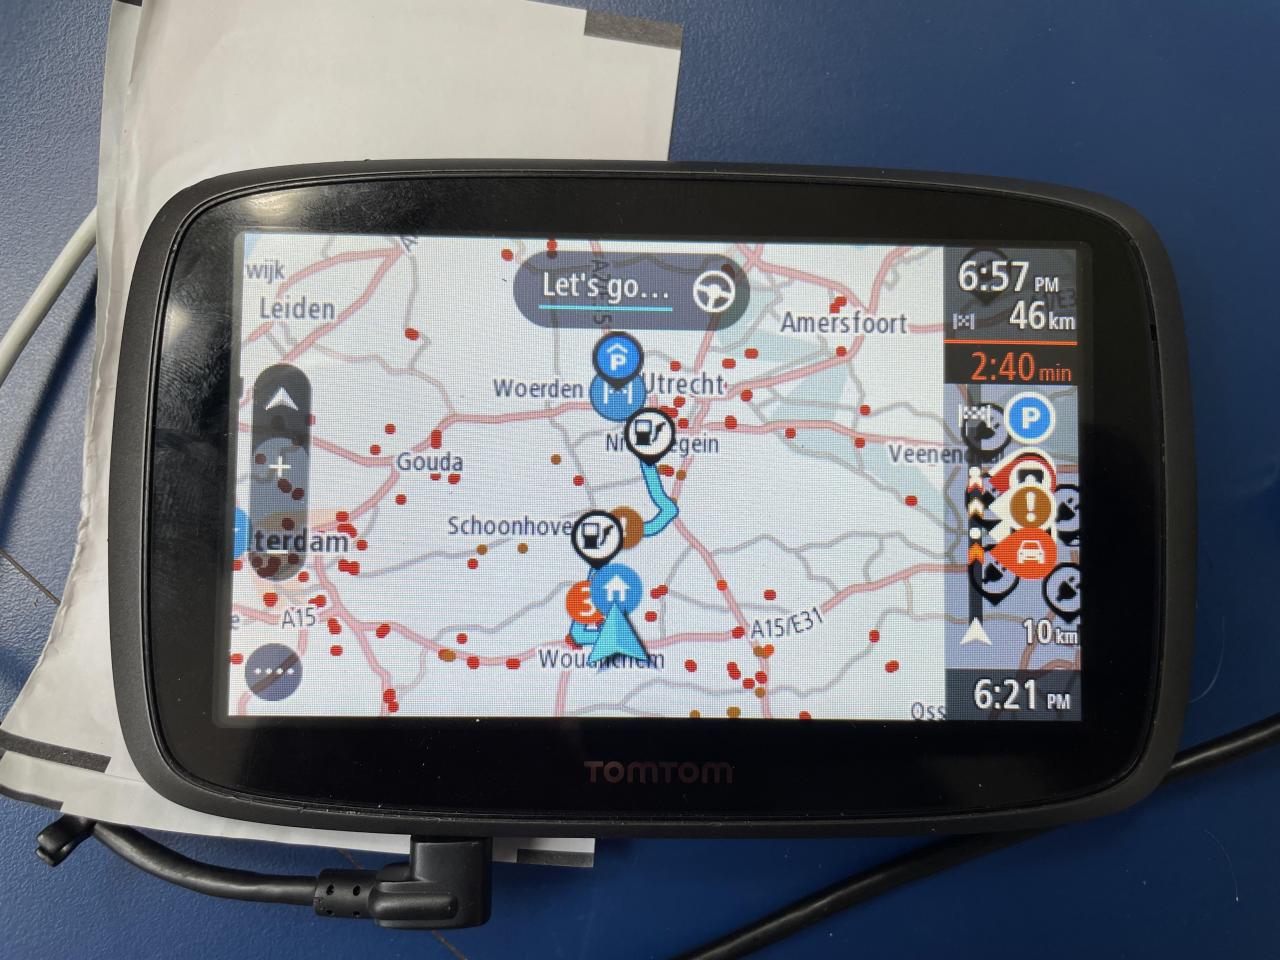 Replacing the battery of my wife's TomTom GPS navigation device | Team-BHP